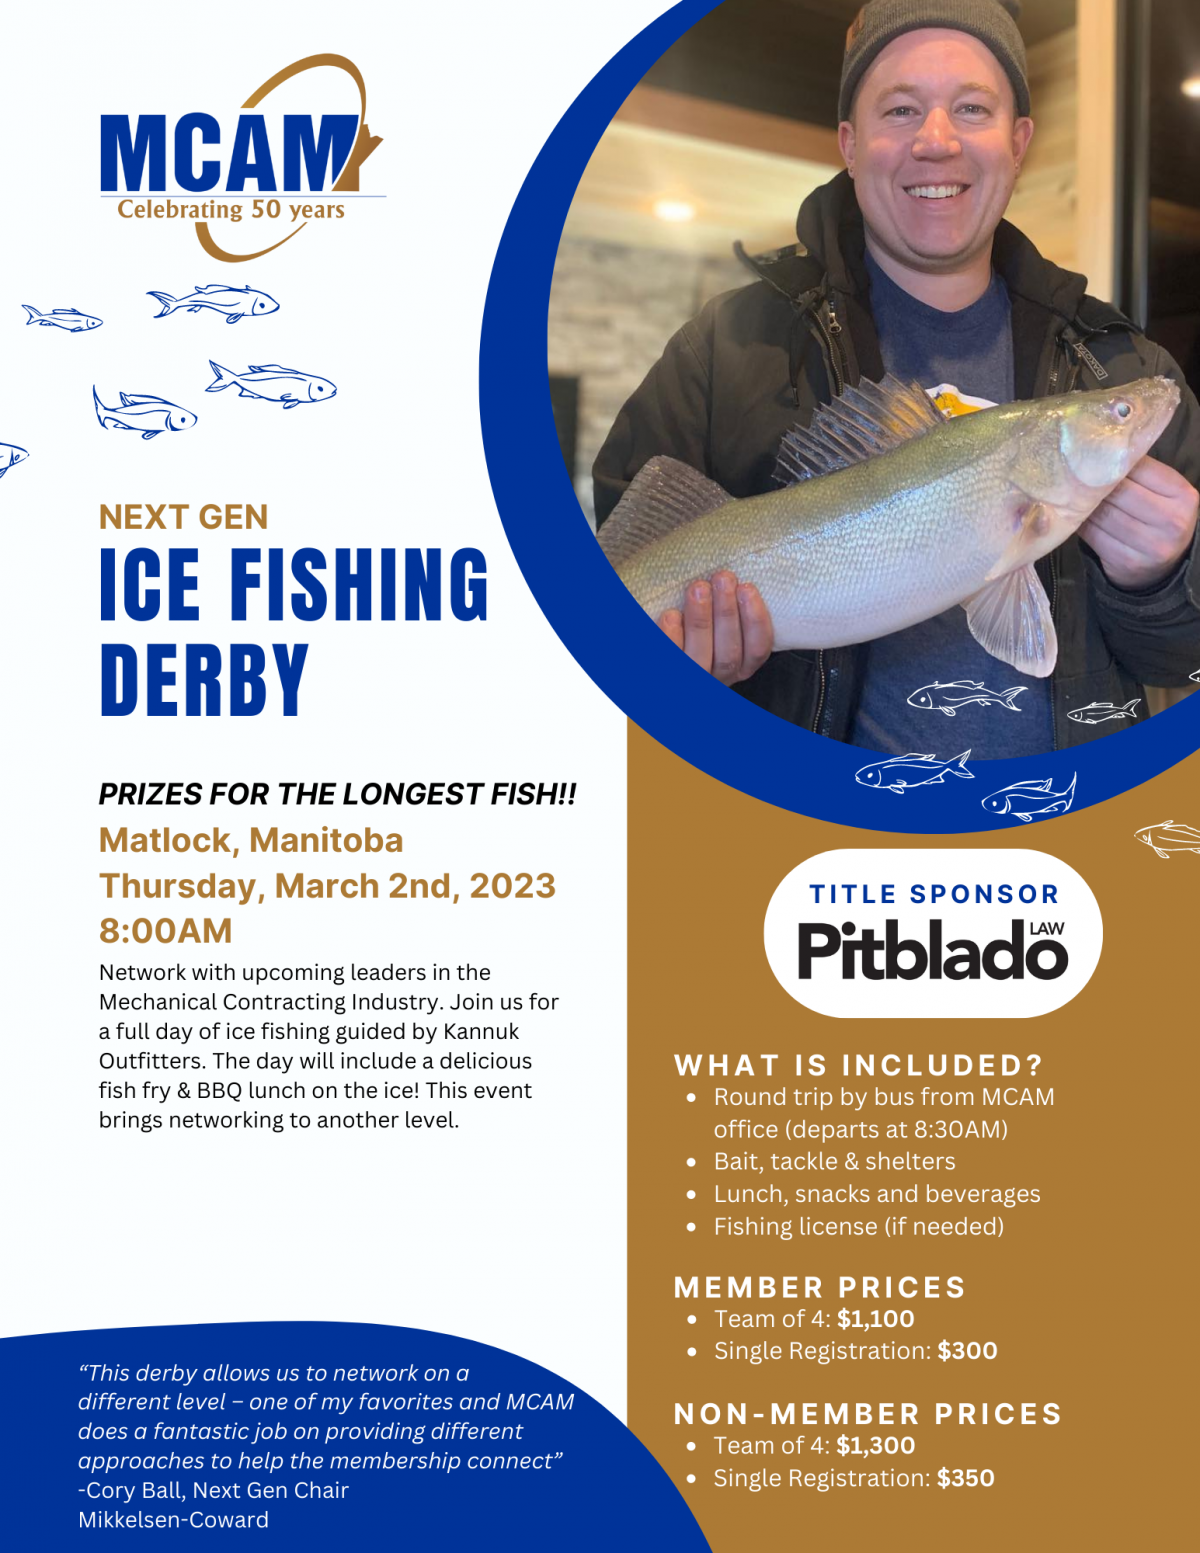 Ice fishing derby set for this weekend - Columbia Valley Pioneer